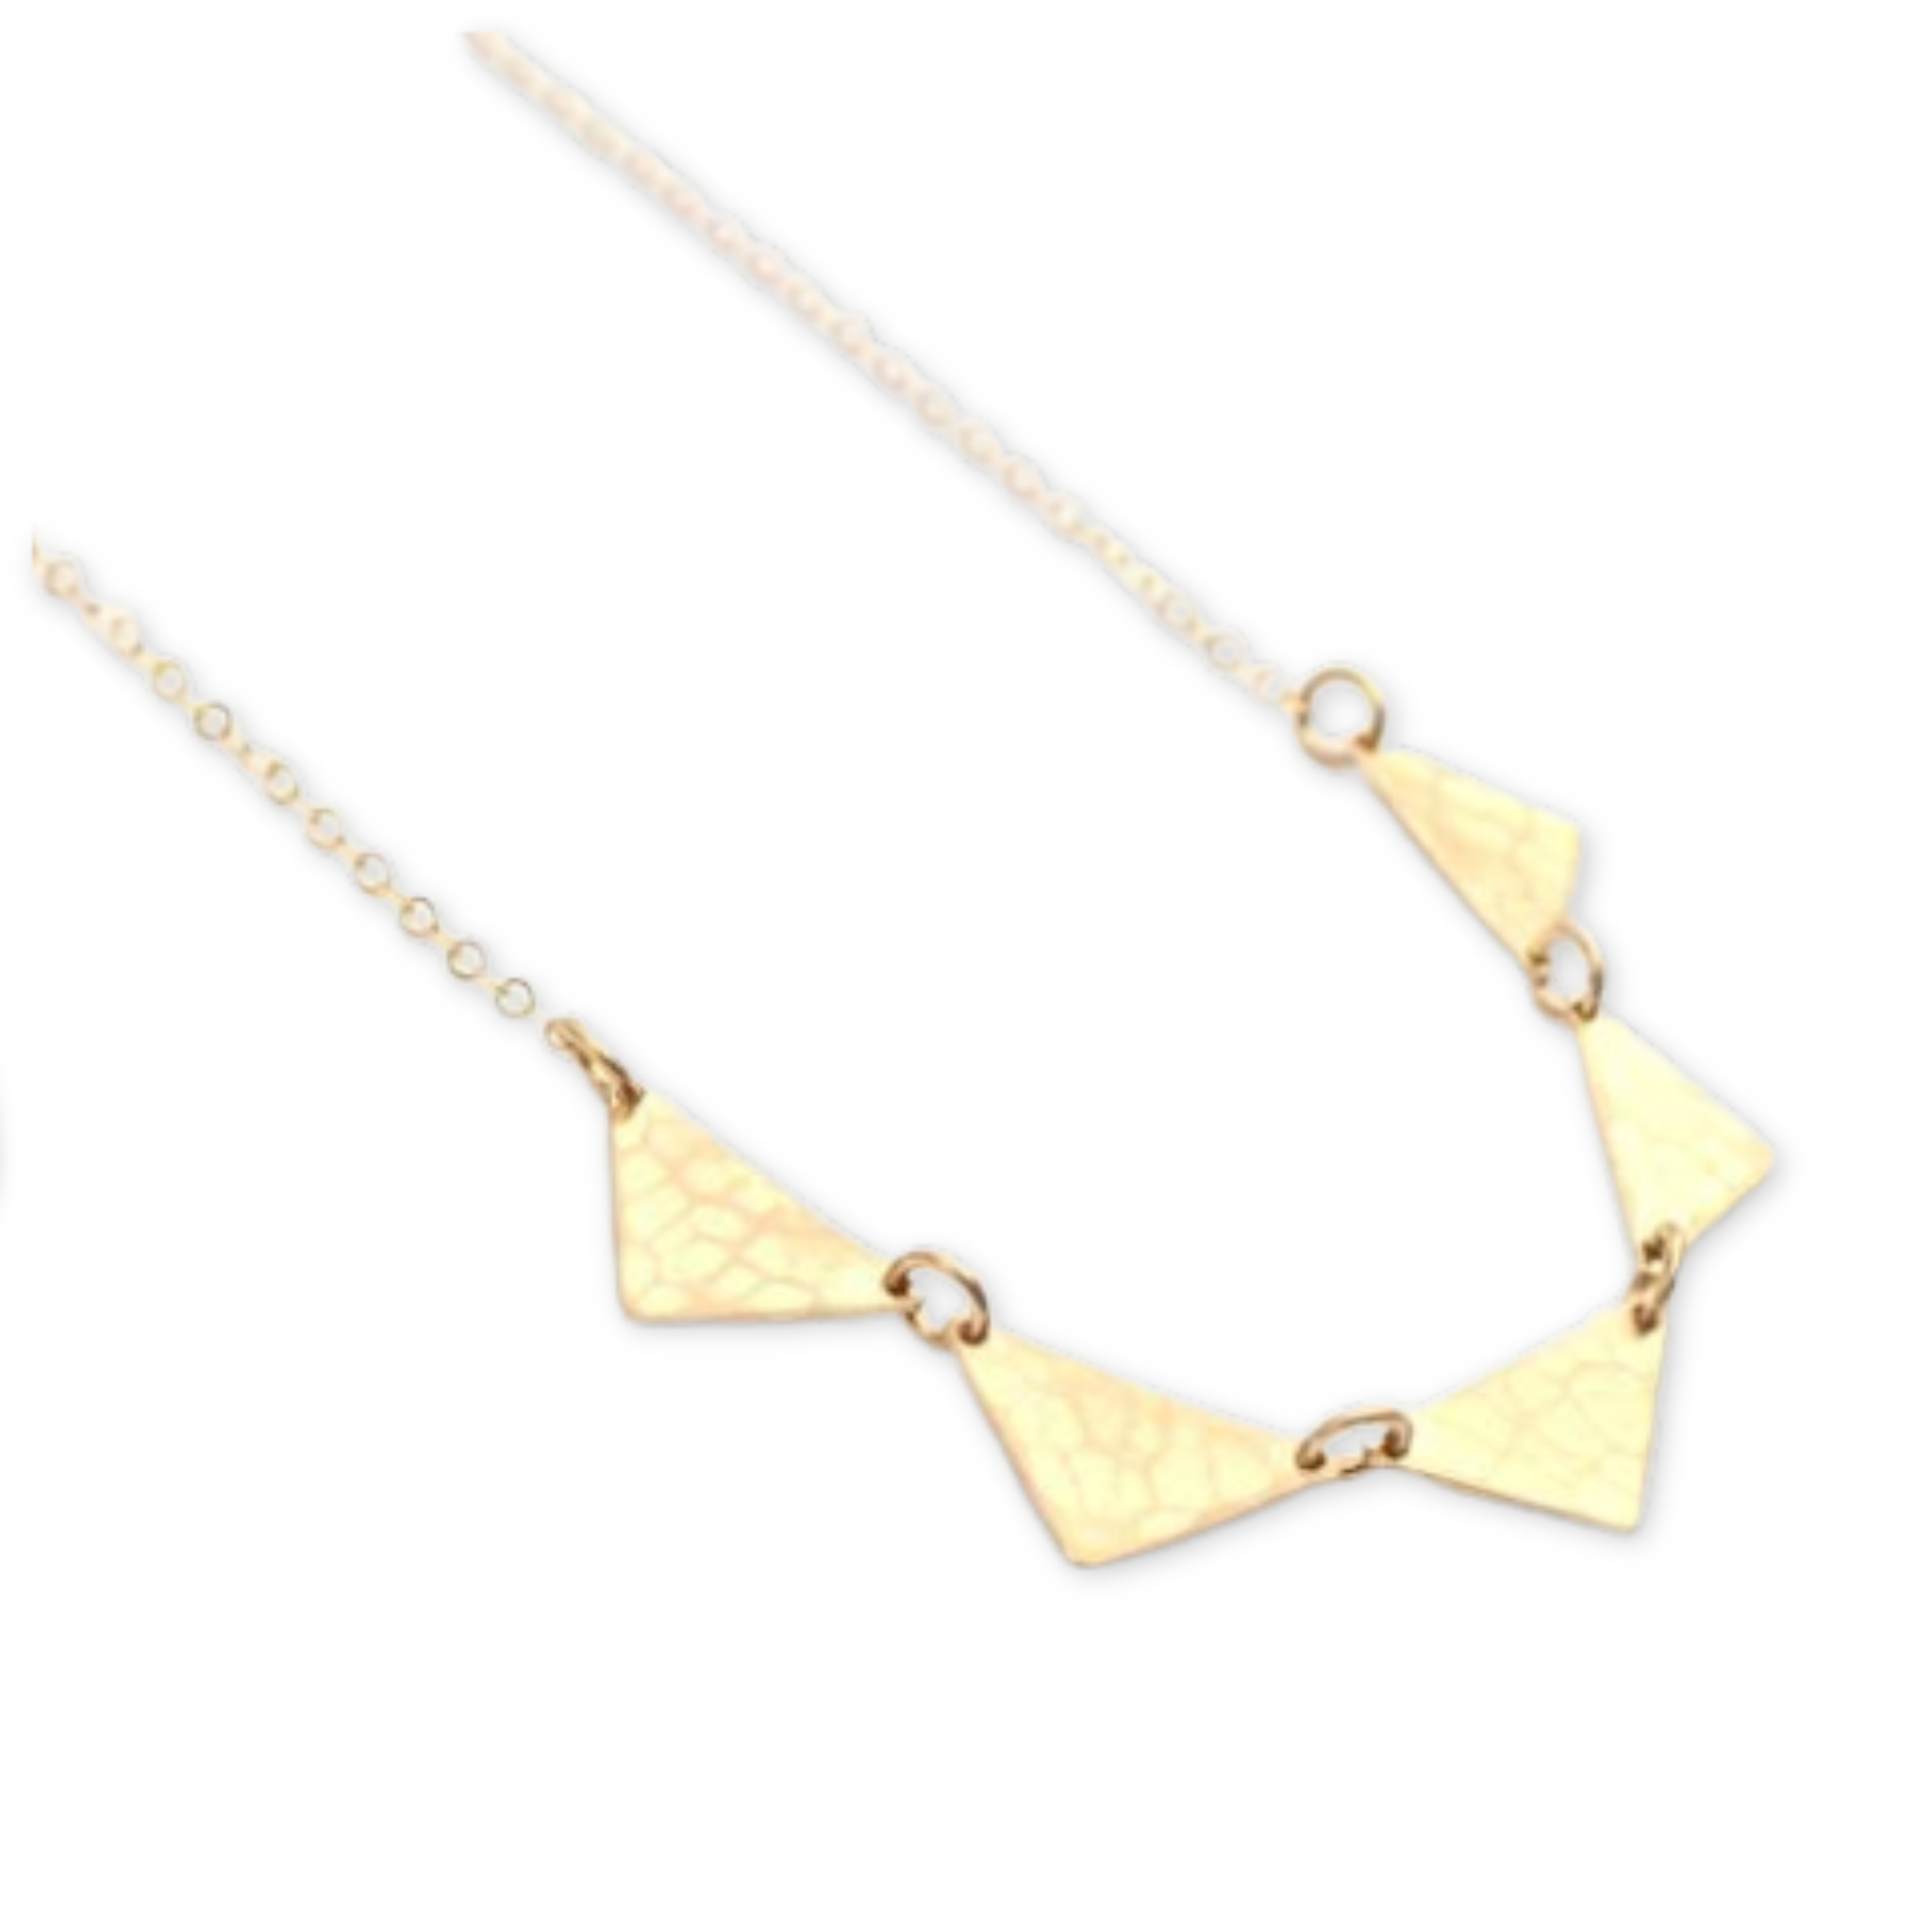 five hammered triangle pendants hanging on a simple thin necklace chain